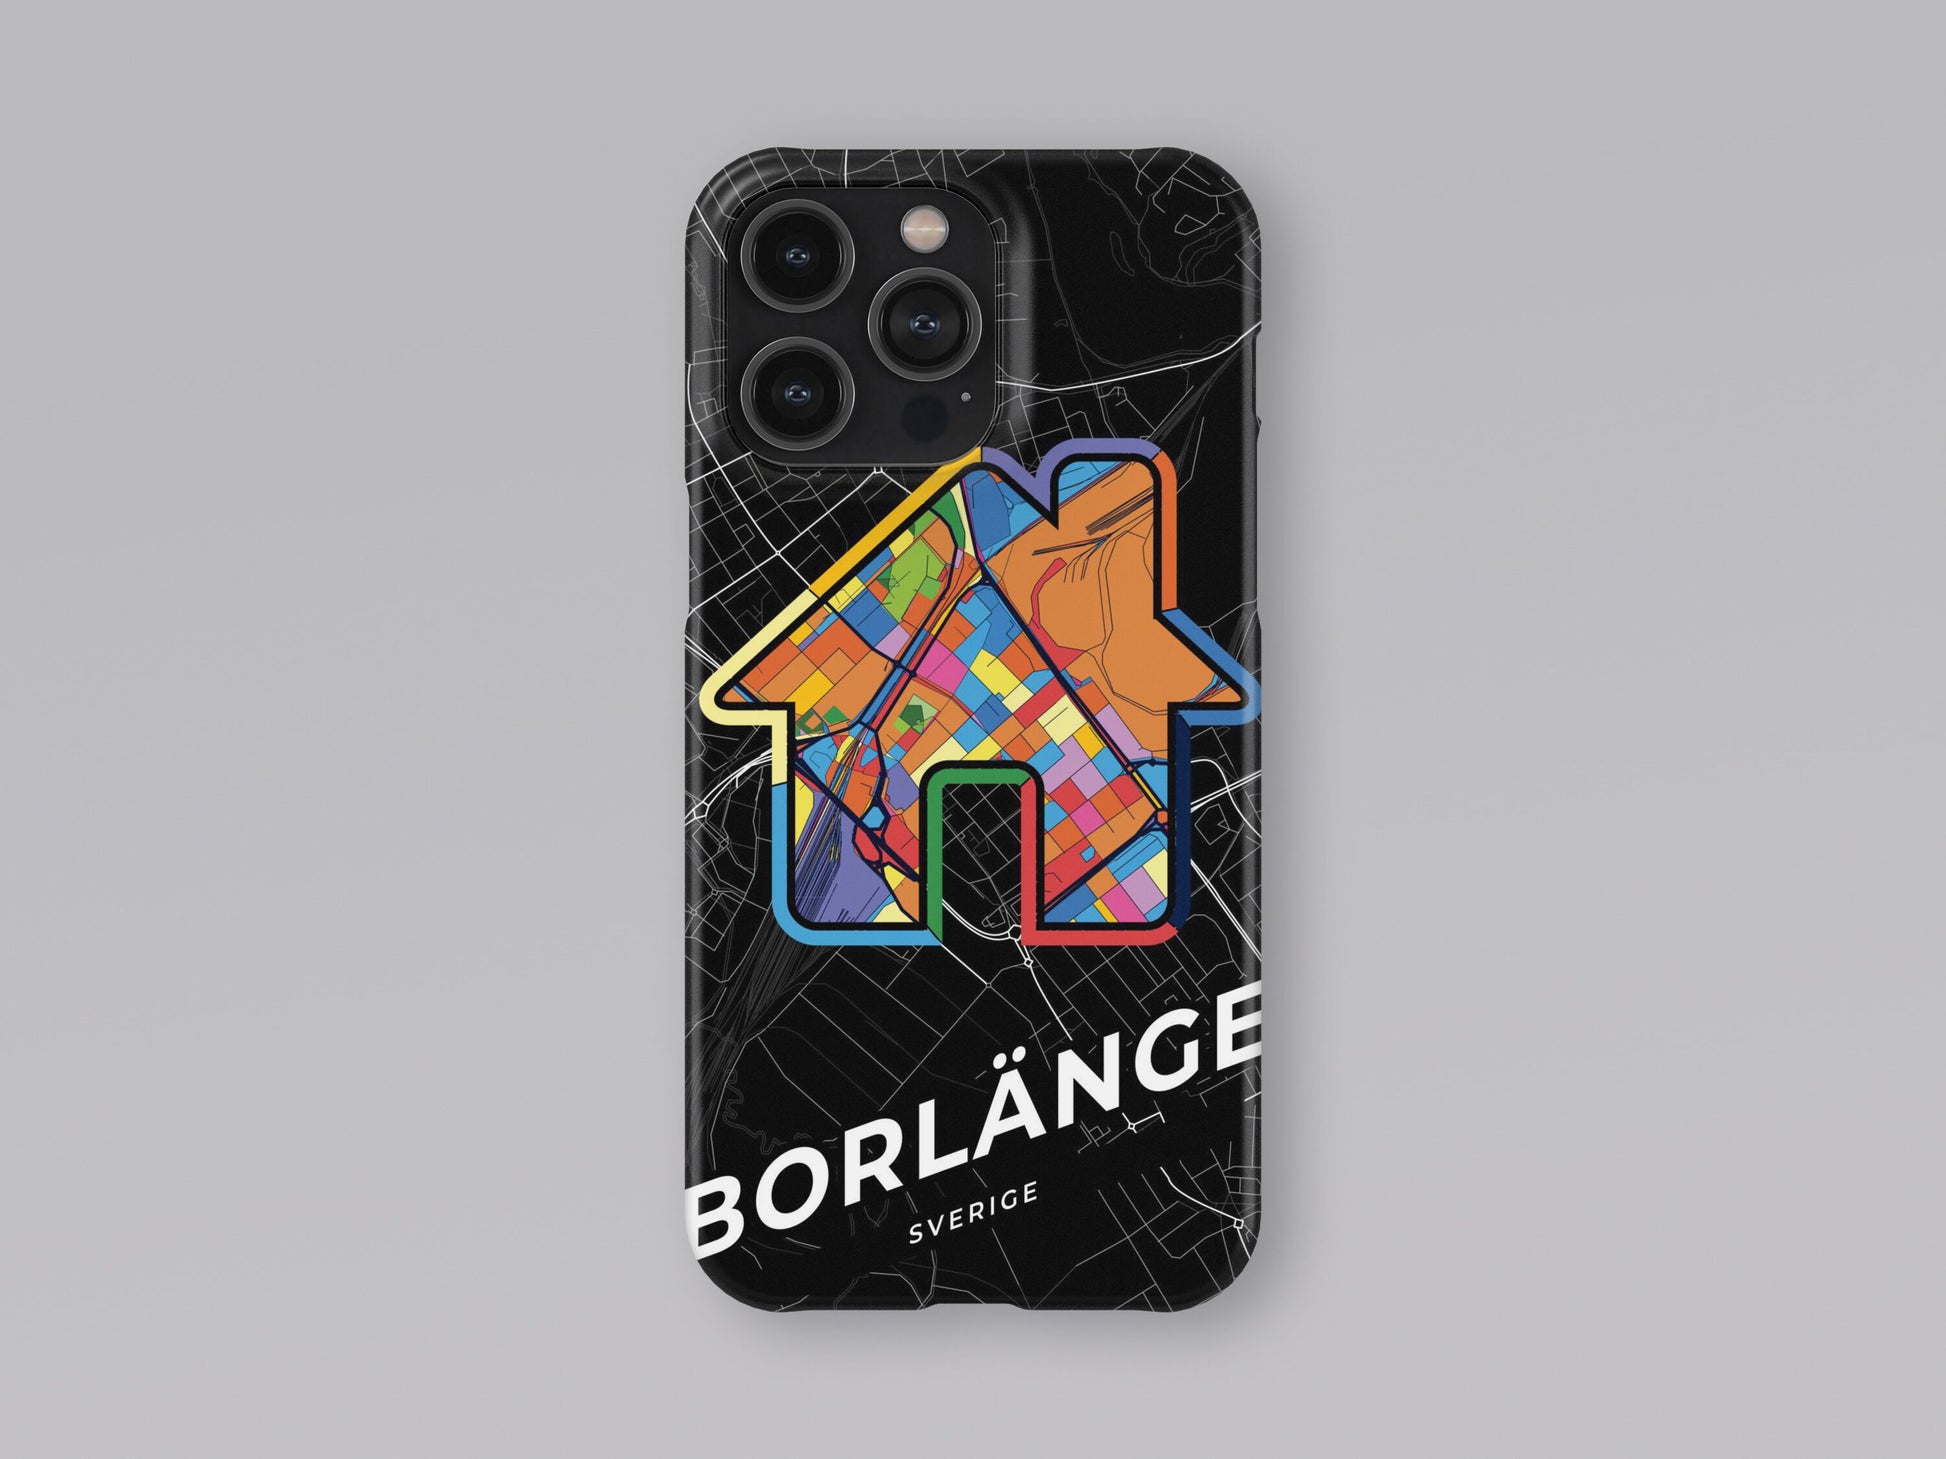 Borlänge Sweden slim phone case with colorful icon. Birthday, wedding or housewarming gift. Couple match cases. 3